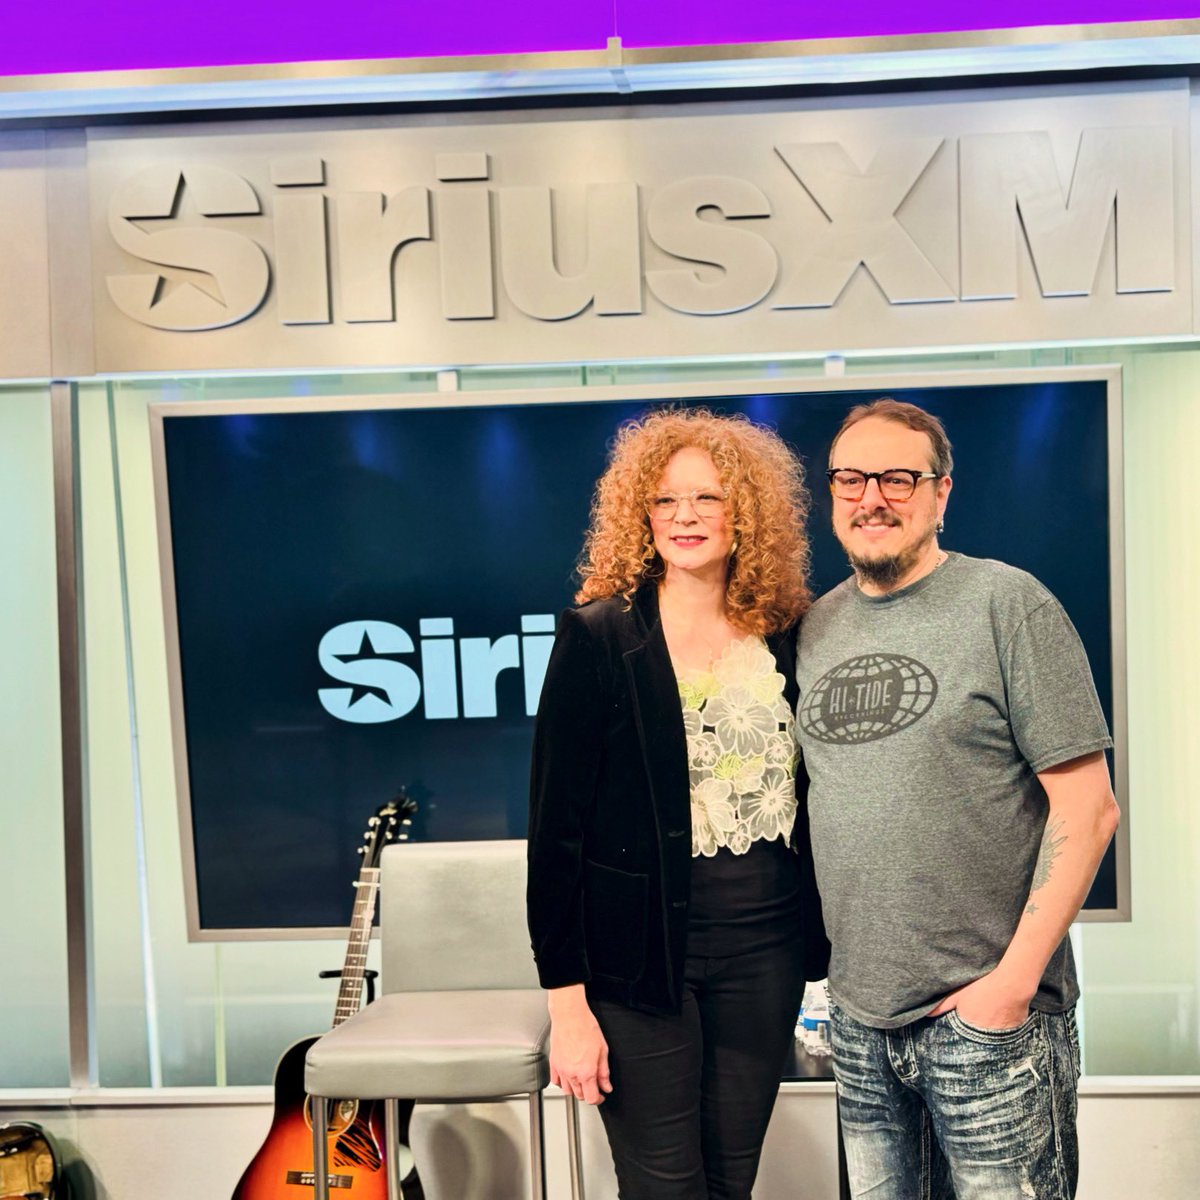 My office today. Thanks for inviting me and the Dark Shadow Recording team up to the #NYC @SIRIUSXM house for a chat today, @siriusbluegrass Joey Black! . (Please say it won’t be 20 years between this and the next in person visit.) . #NewMusic